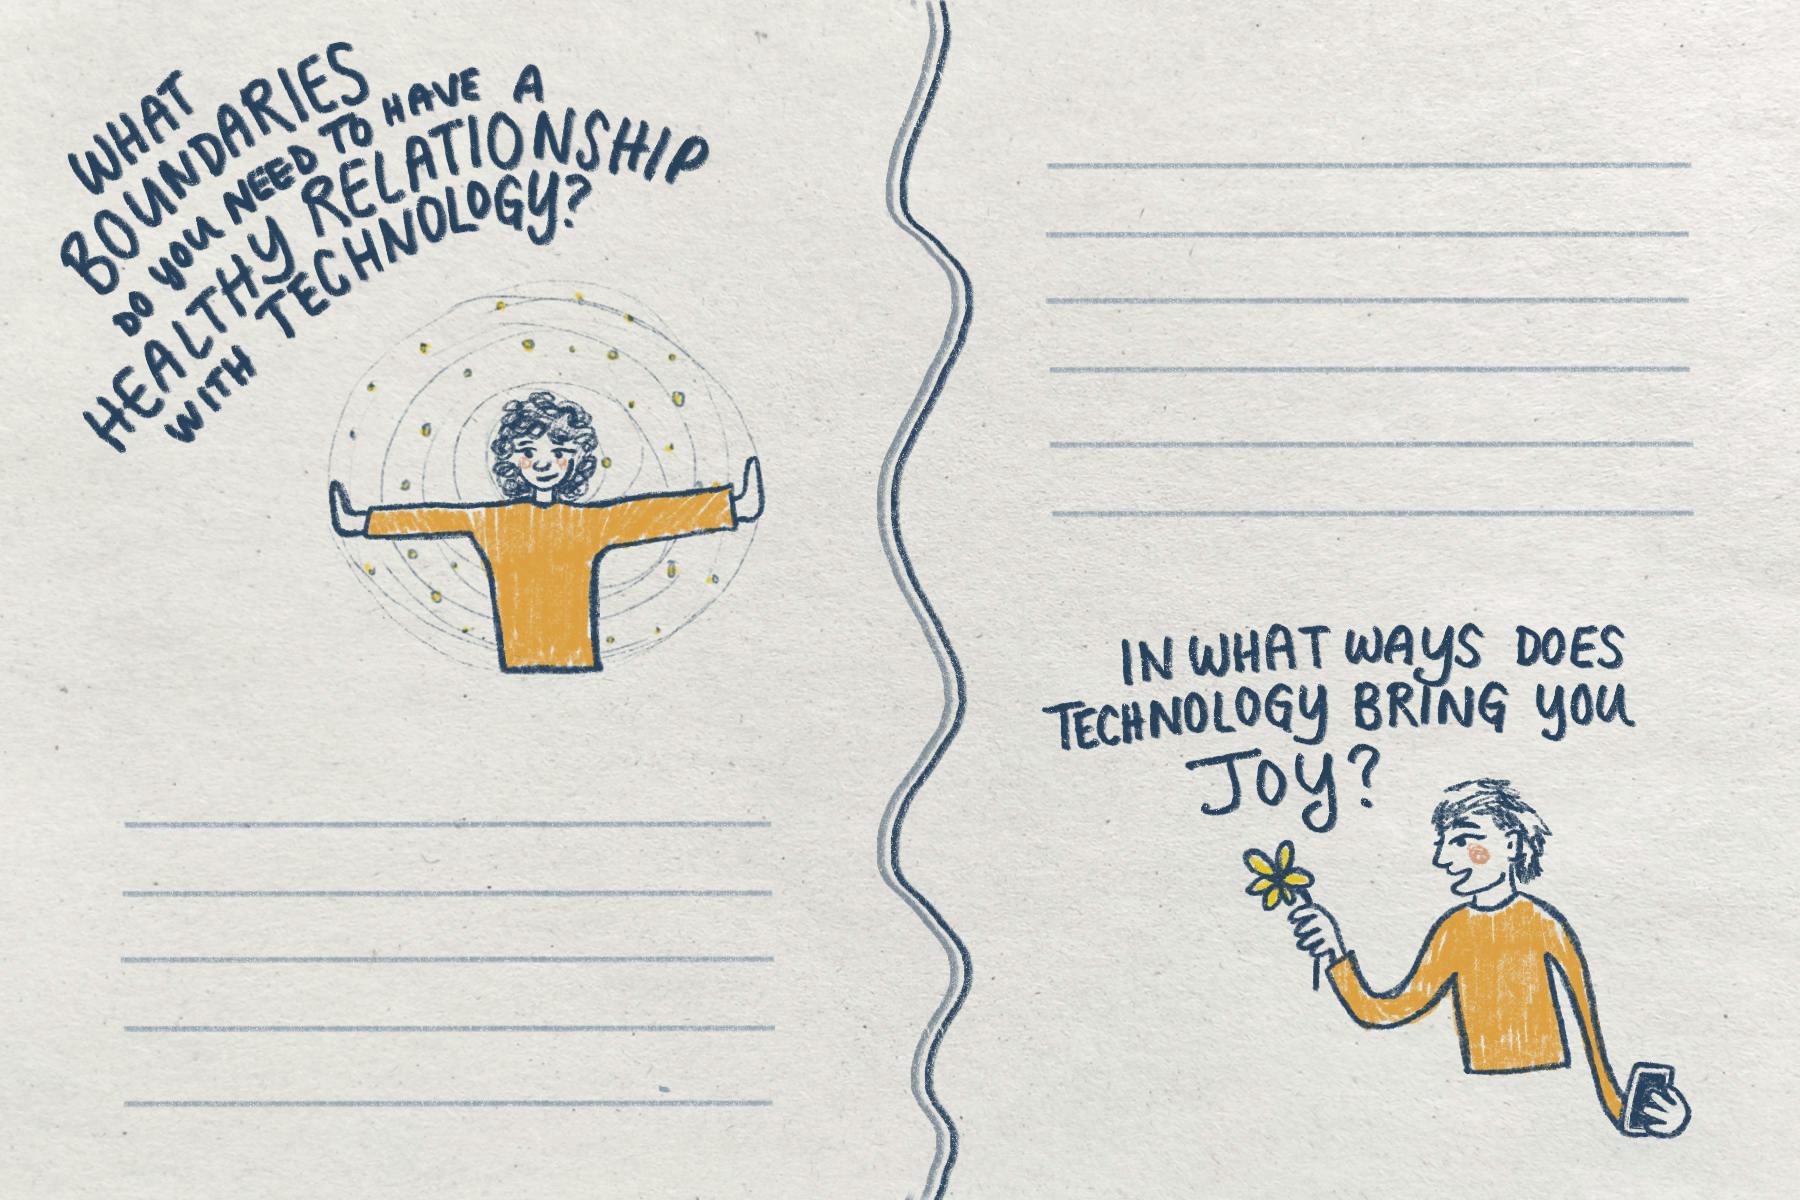 One of our handouts, which is divided vertically into two parts. On the left, a cartoon drawing of a person spreading their arms and enforcing a boundary cloud asks, "What boundaries do you need to have a healthy relationship with technology?". On the right side, a cartoon person holding a flower in one hand and a smartphone in the other asks, "In what ways does technology bring you joy?"